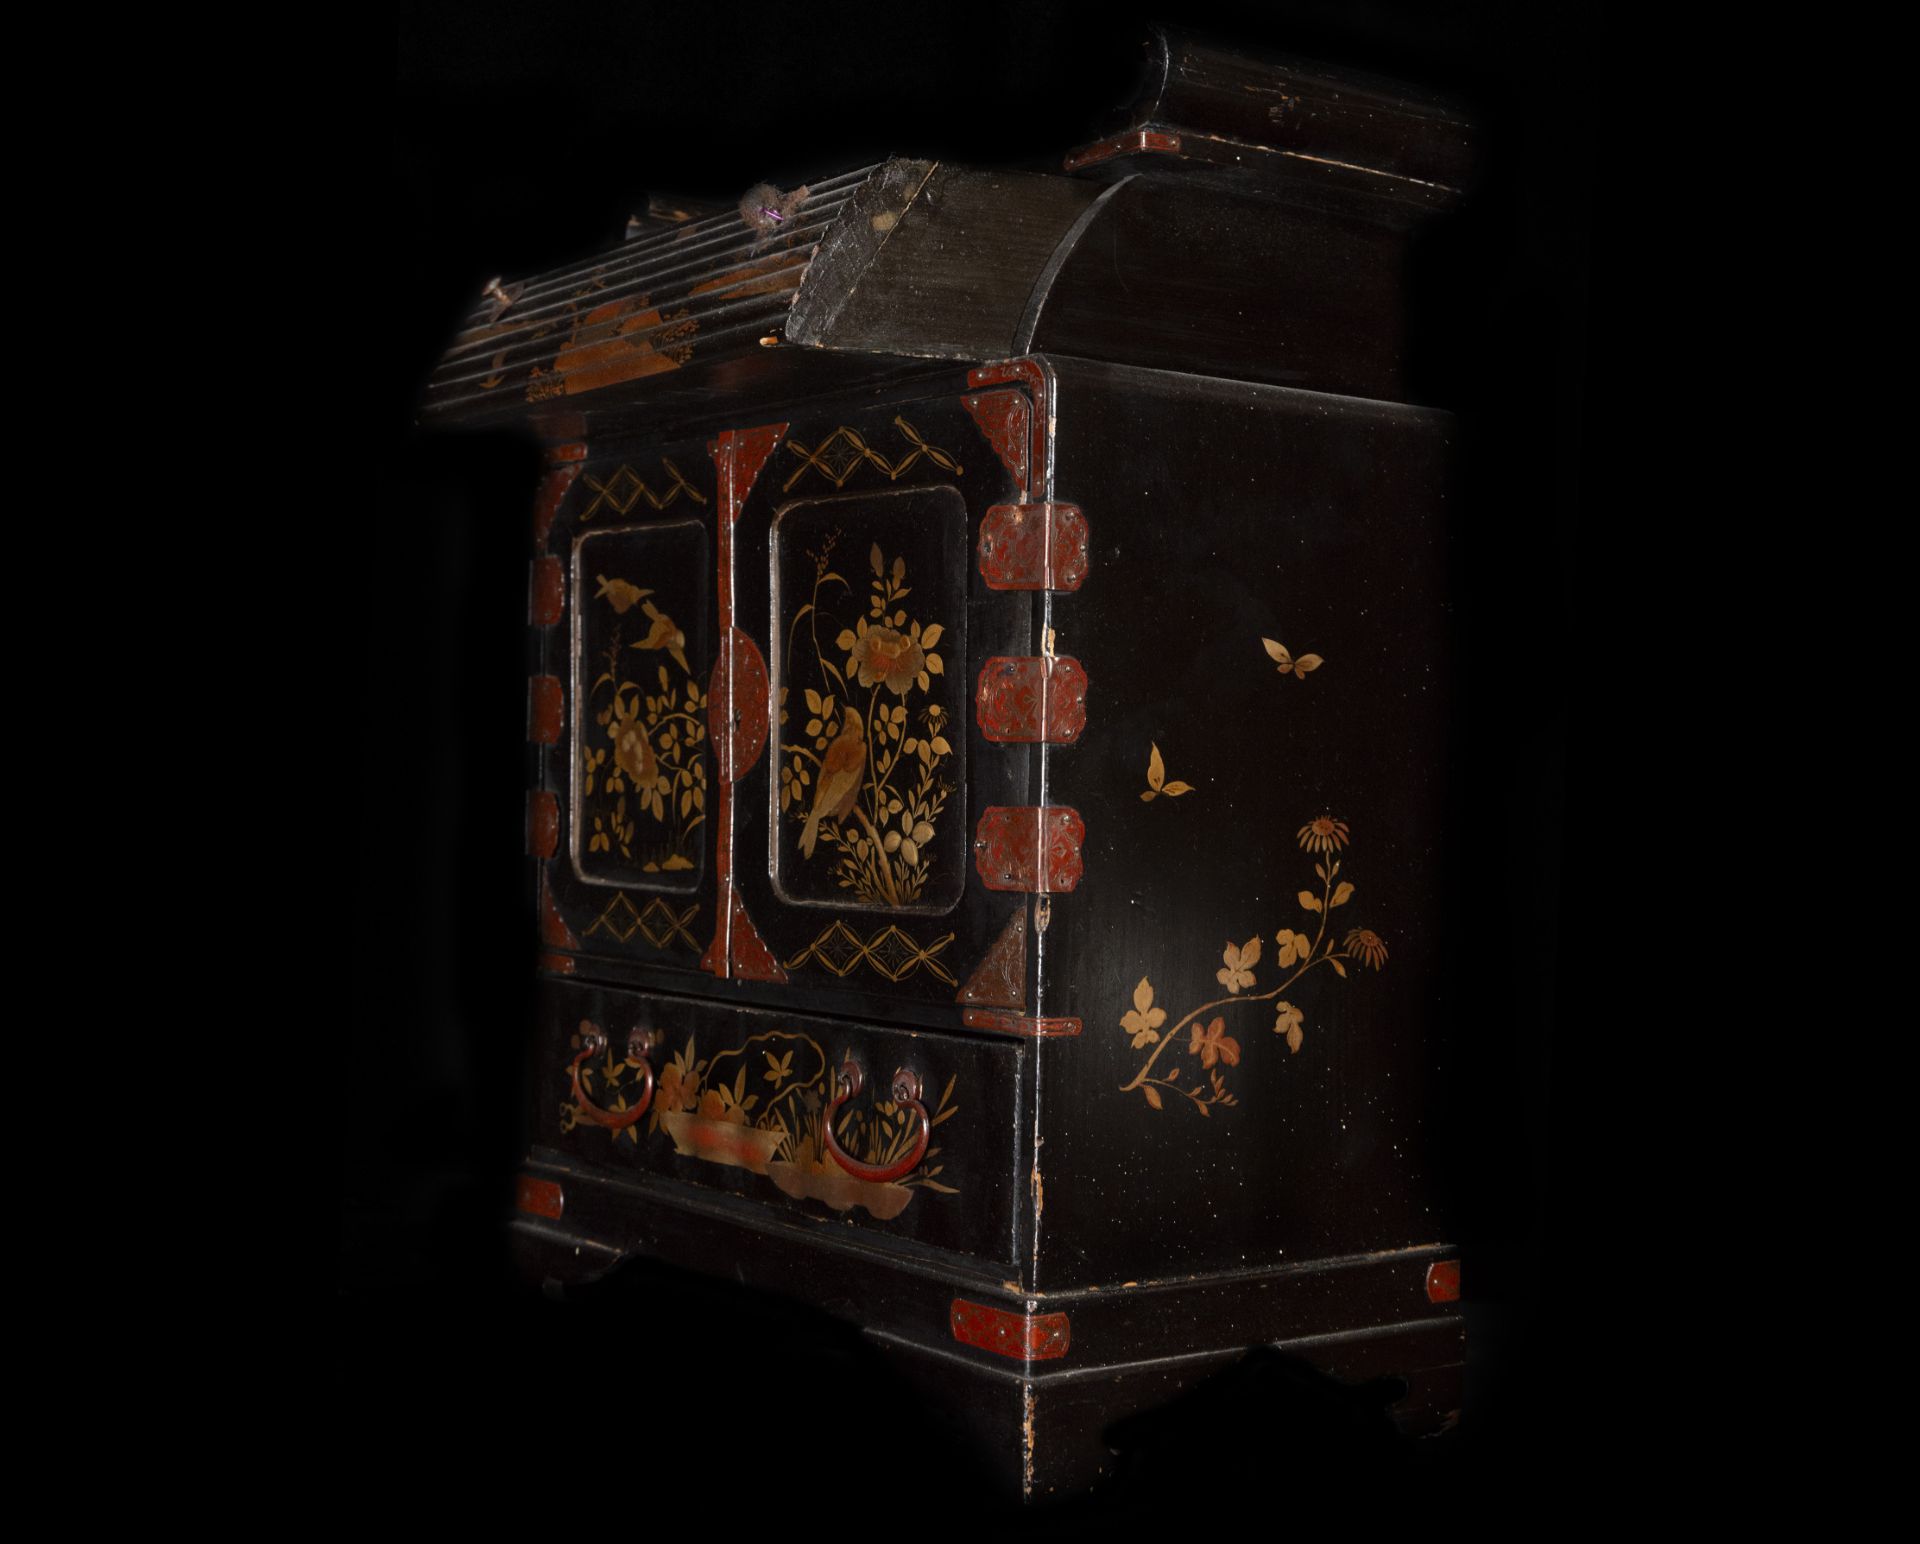 Exquisite Japanese Meiji tabletop cabinet in lacquered and gilded wood, 19th century - Image 7 of 8